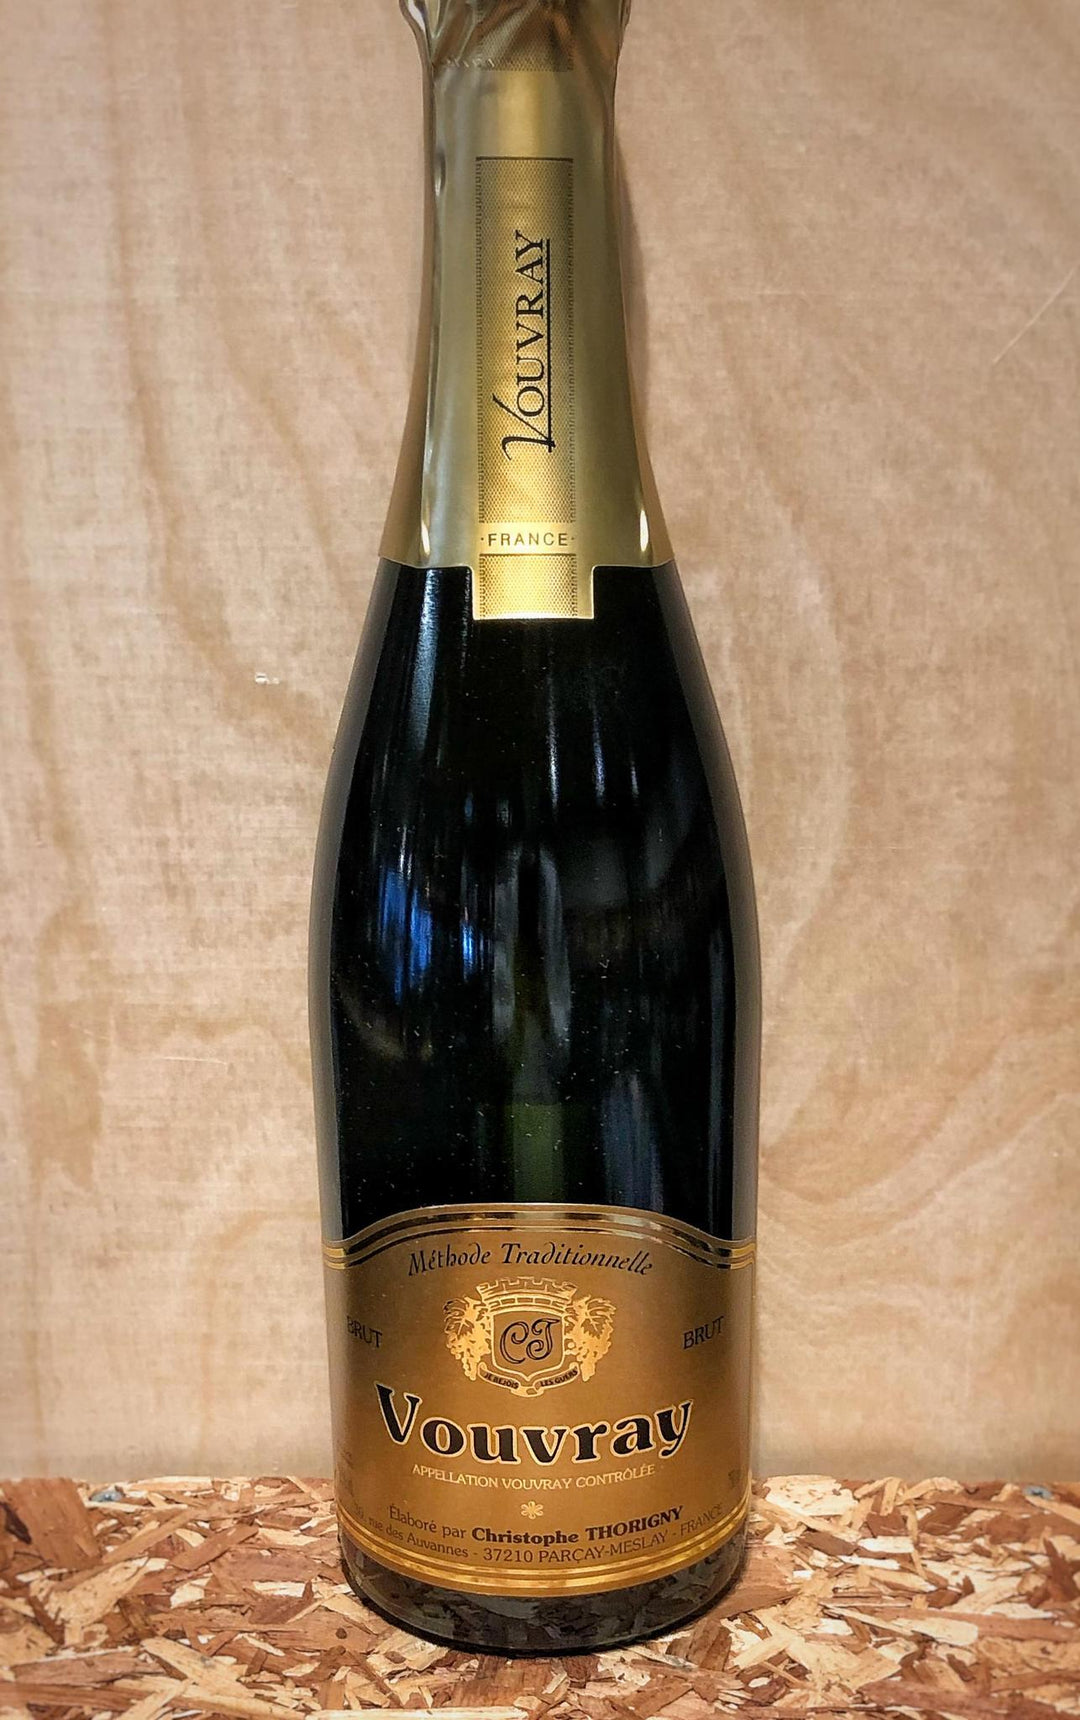 Domaine Thorigny Vouvray Methode Traditionnelle Brut 2018 (Loire Valley, France)